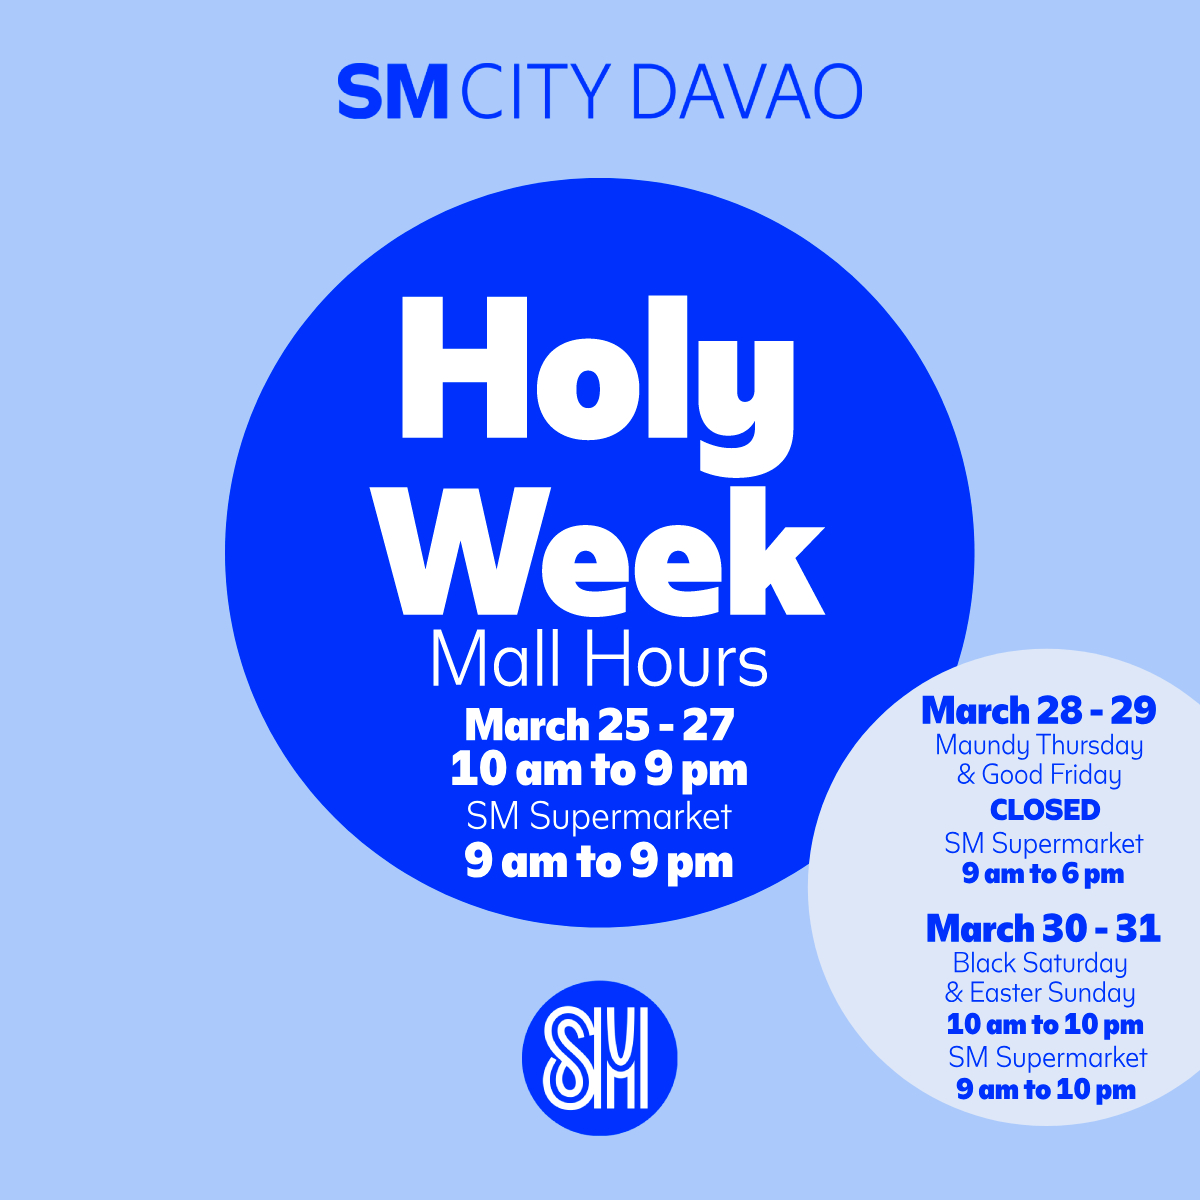 📣Please be guided on SM City Davao's Holy Week mall hours and SM Supermarket Store hours. Have a blessed Lenten Season, #SMFam!